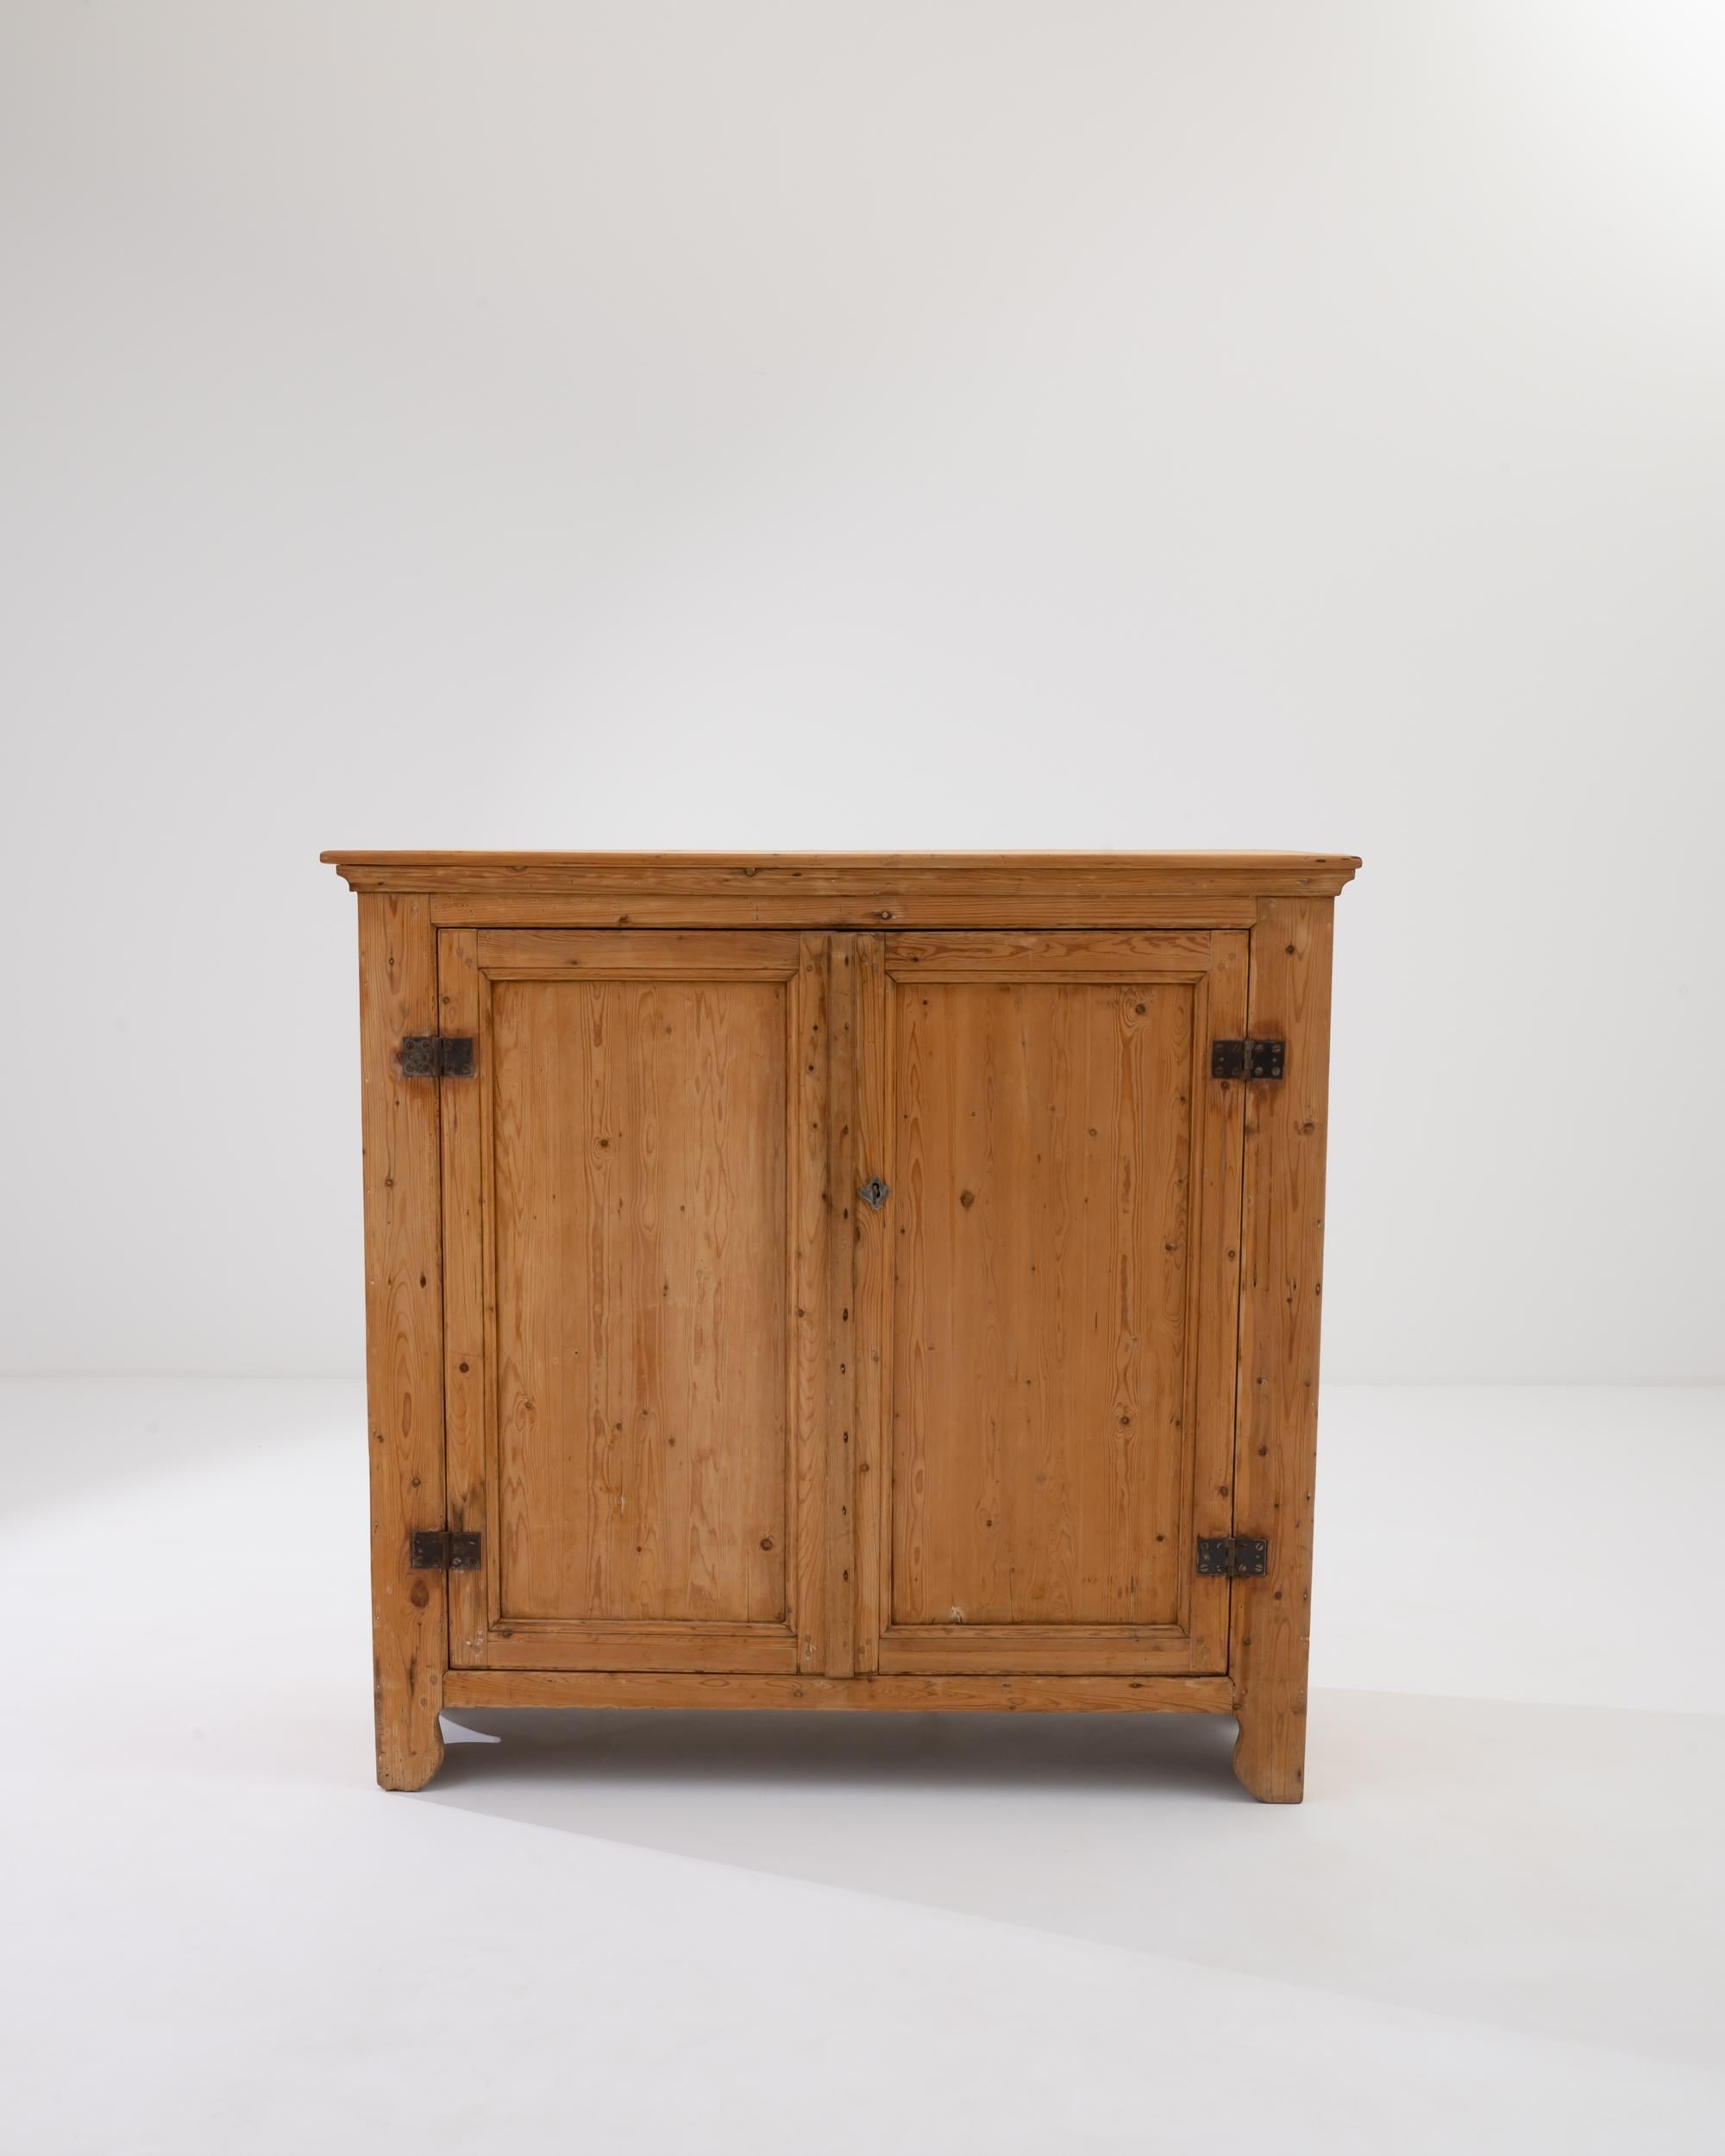 A wooden cabinet from 19th century France. Twin doors swing outwards to reveal three storage compartments, whose pale color contrasts pleasantly with the sunny golden brown of the cabinet’s exterior. A time-worn patina covers both the inside and out